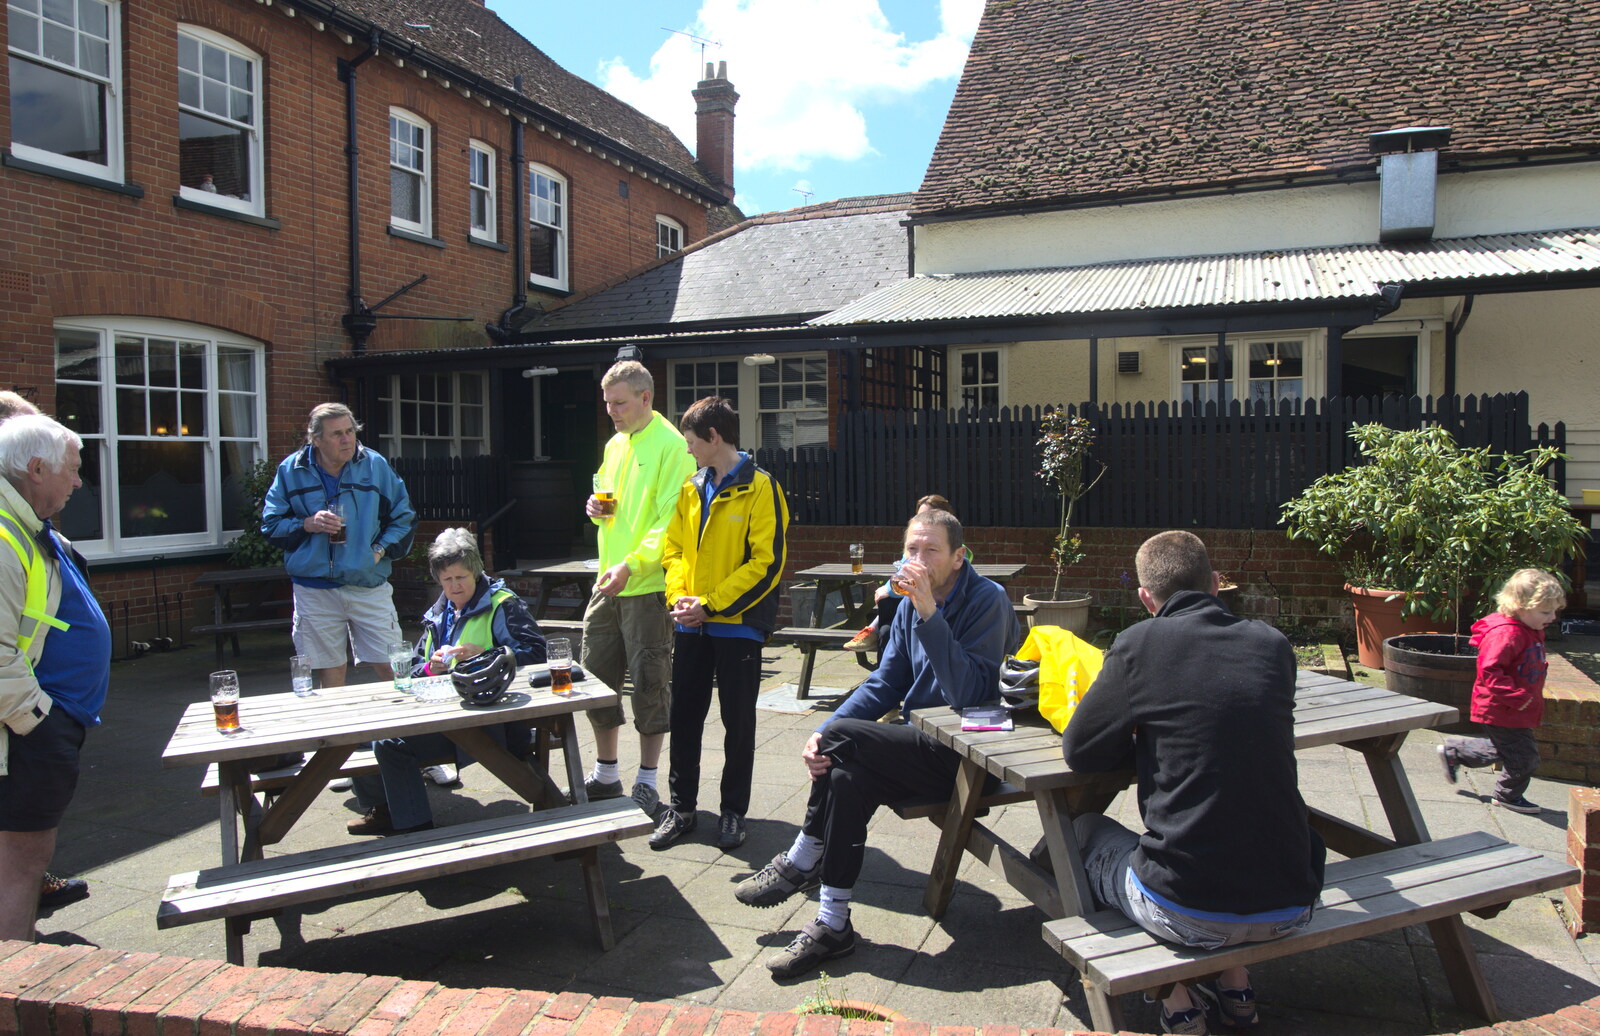 Pub beer garden from The BSCC Cycling Weekend, The Swan Inn, Thaxted, Essex - 12th May 2012